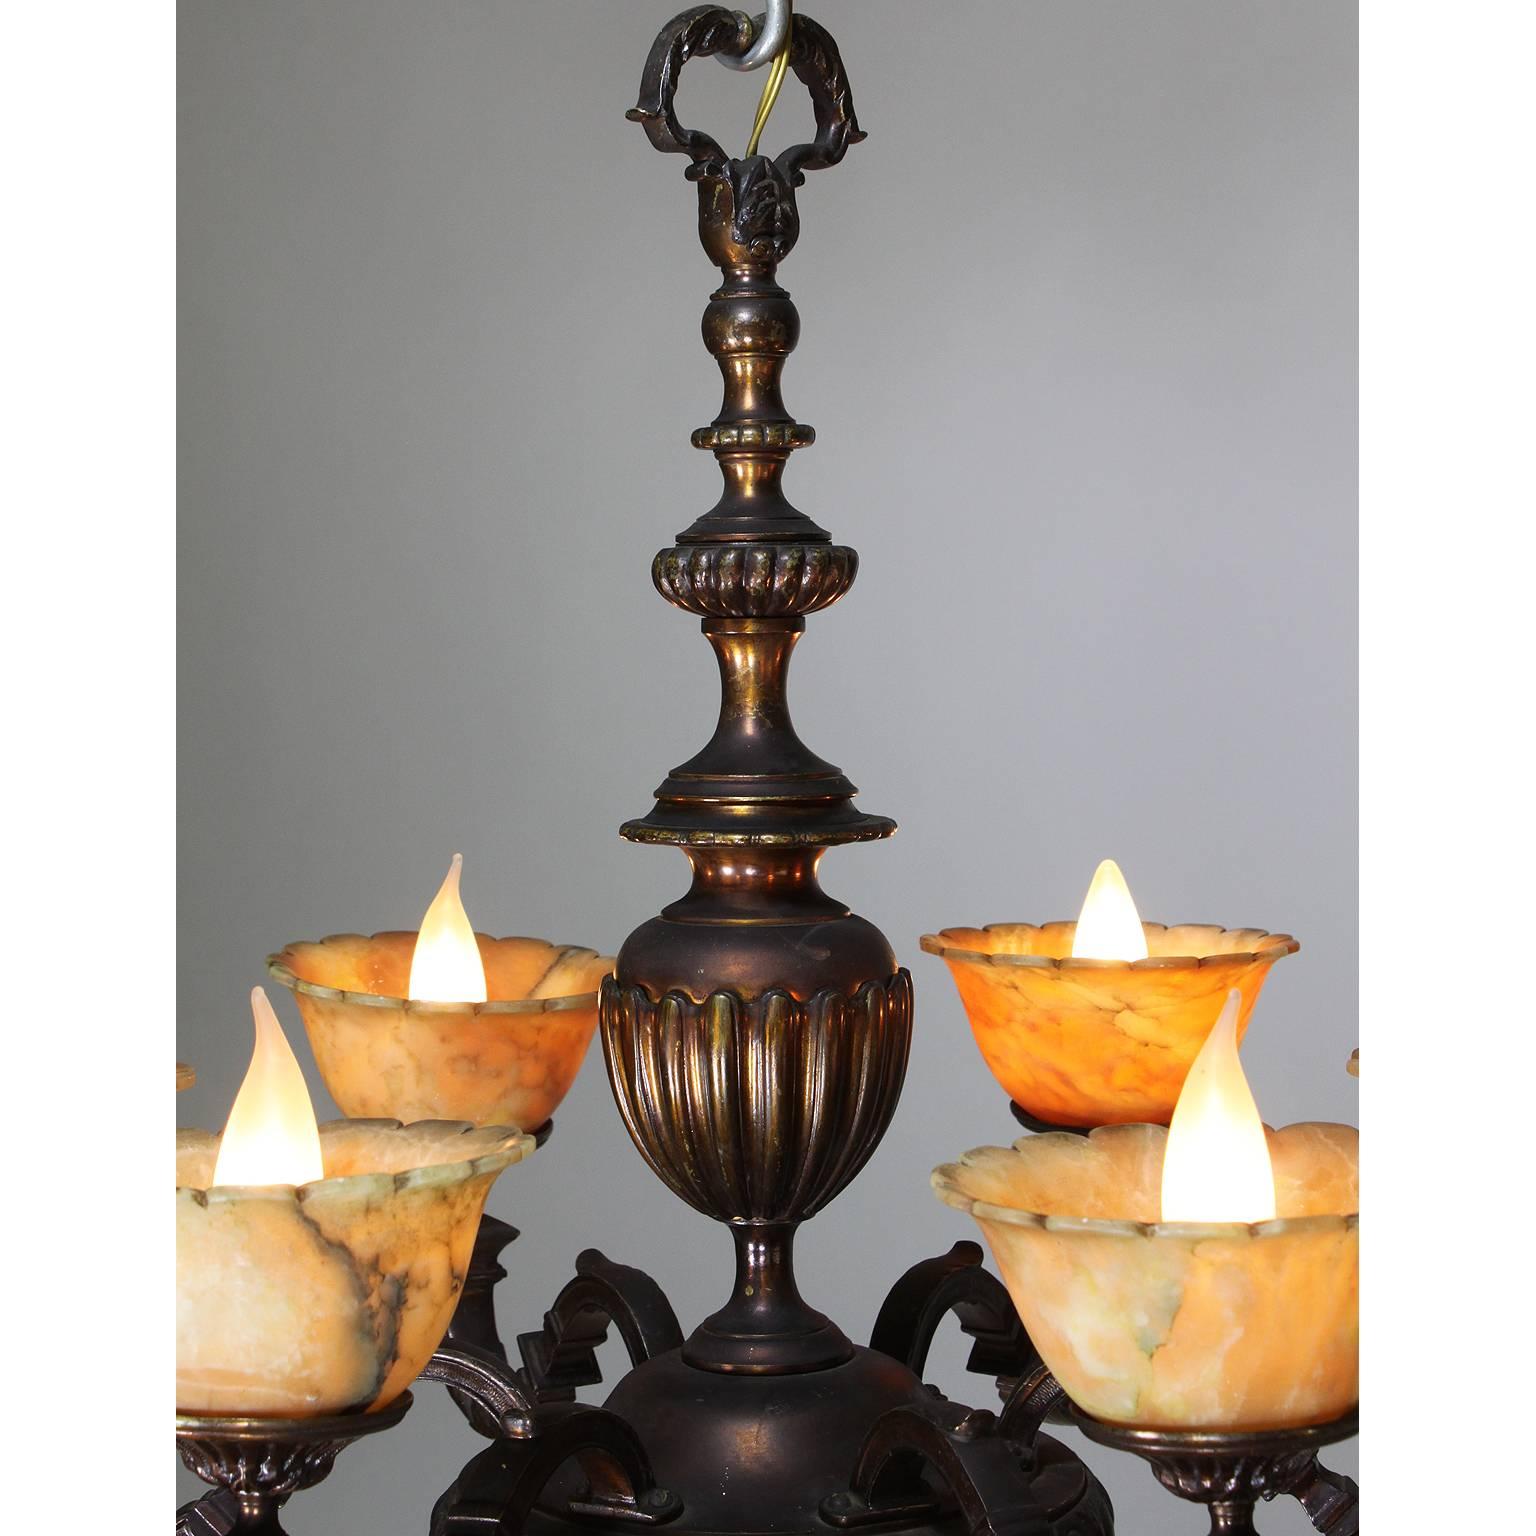 A rare French Art-Deco patinated bronze and amber alabaster six-light chandelier, Paris, circa 1920.

Measures: Height 23 1/4 inches (59.1 cm)
Width 28 1/2 inches (72.4 cm).

         